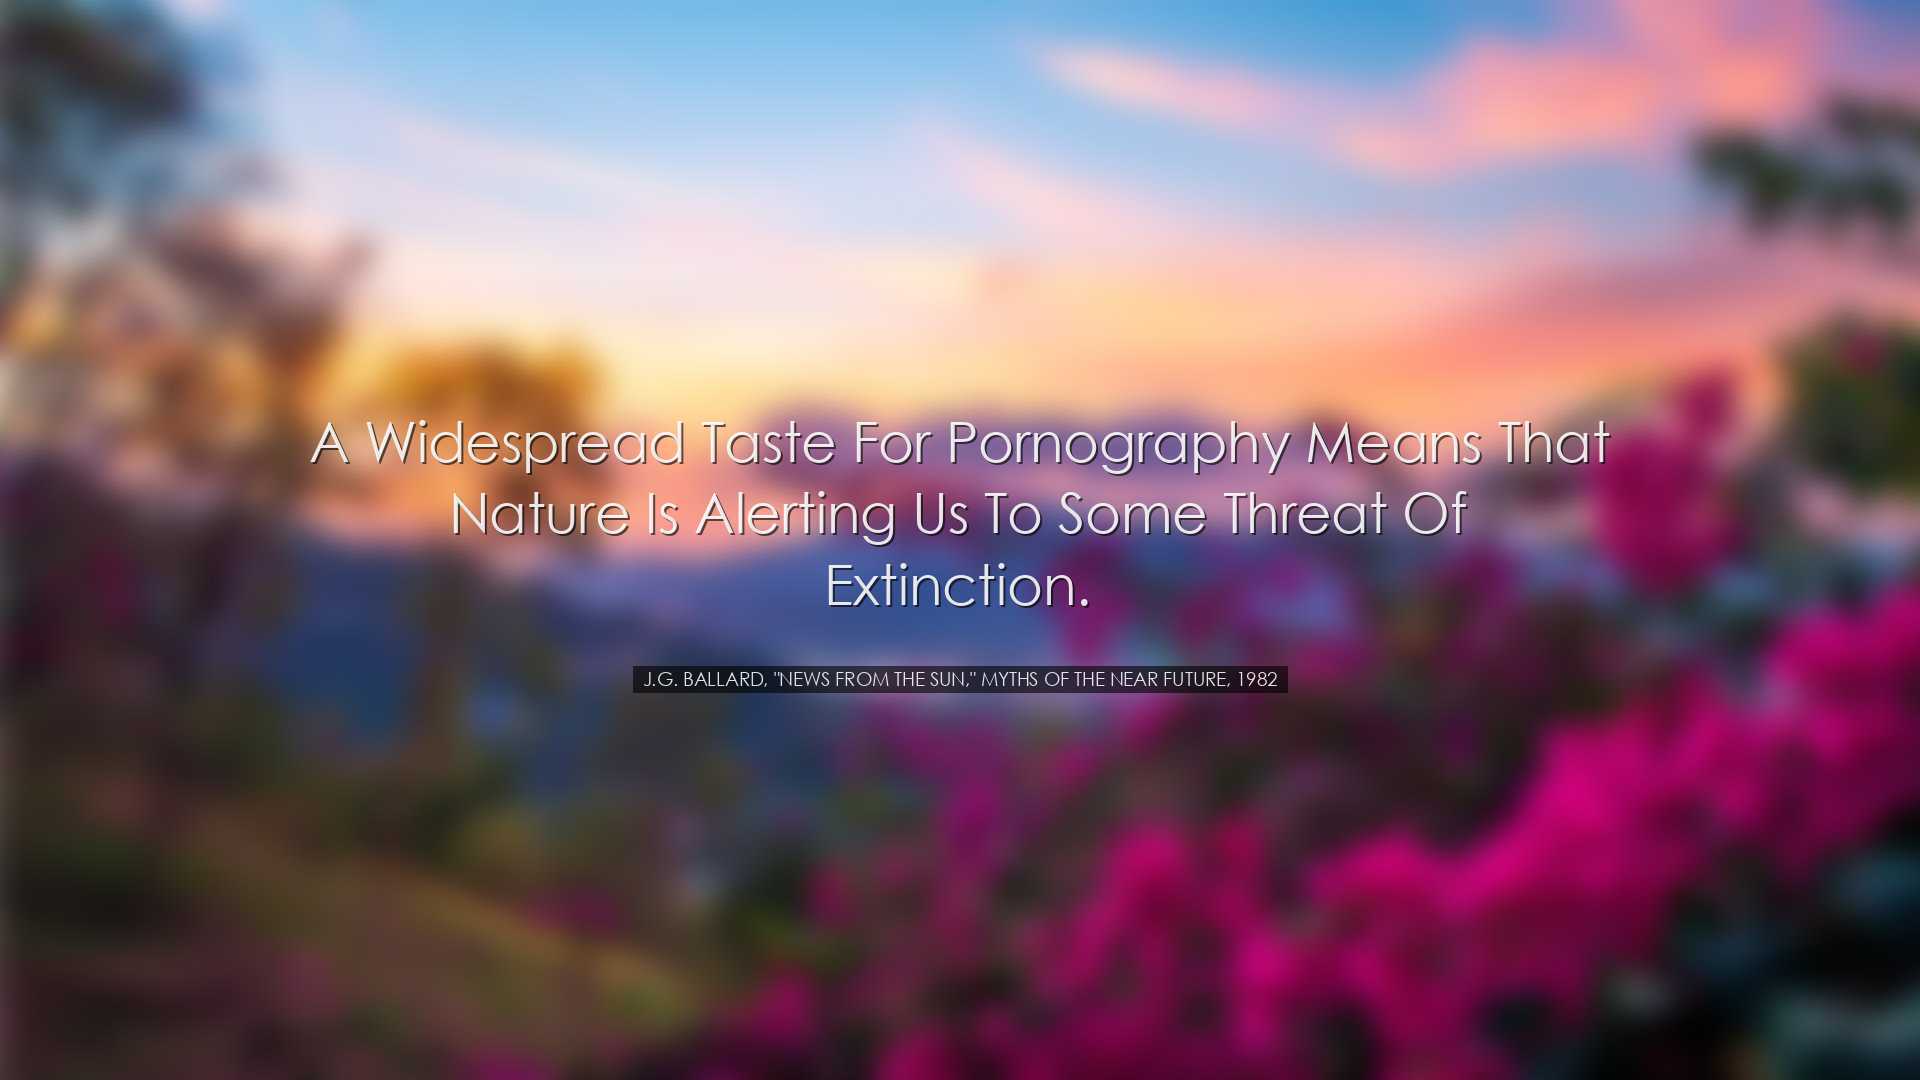 A widespread taste for pornography means that nature is alerting u